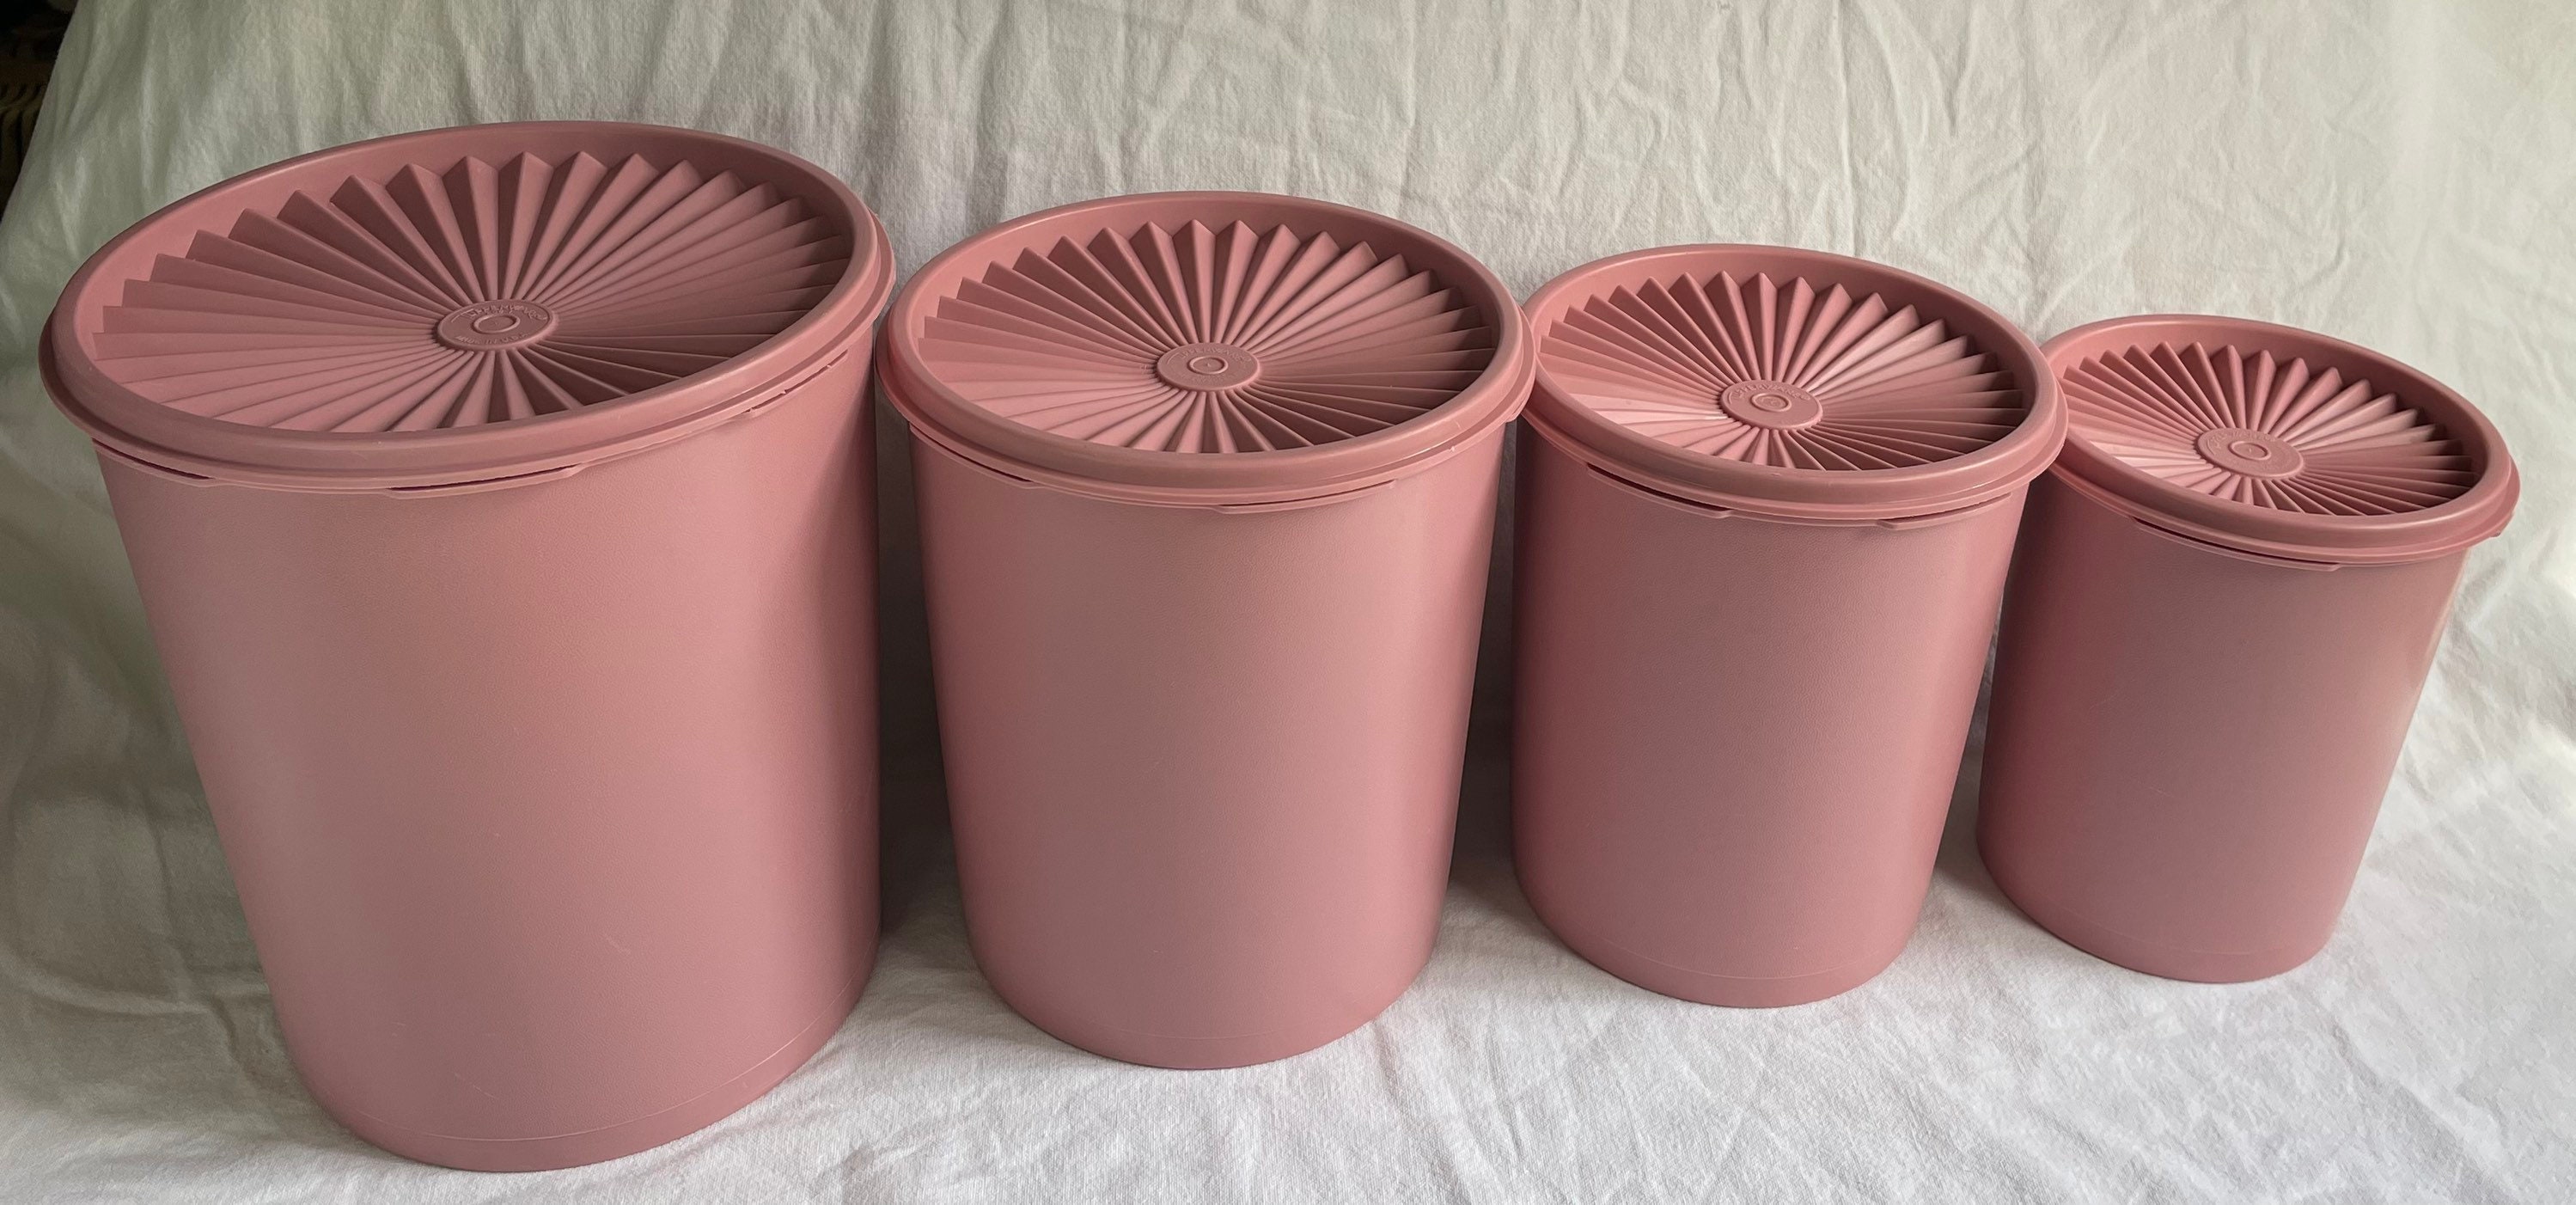 Vintage Pink Tupperware Canisters 